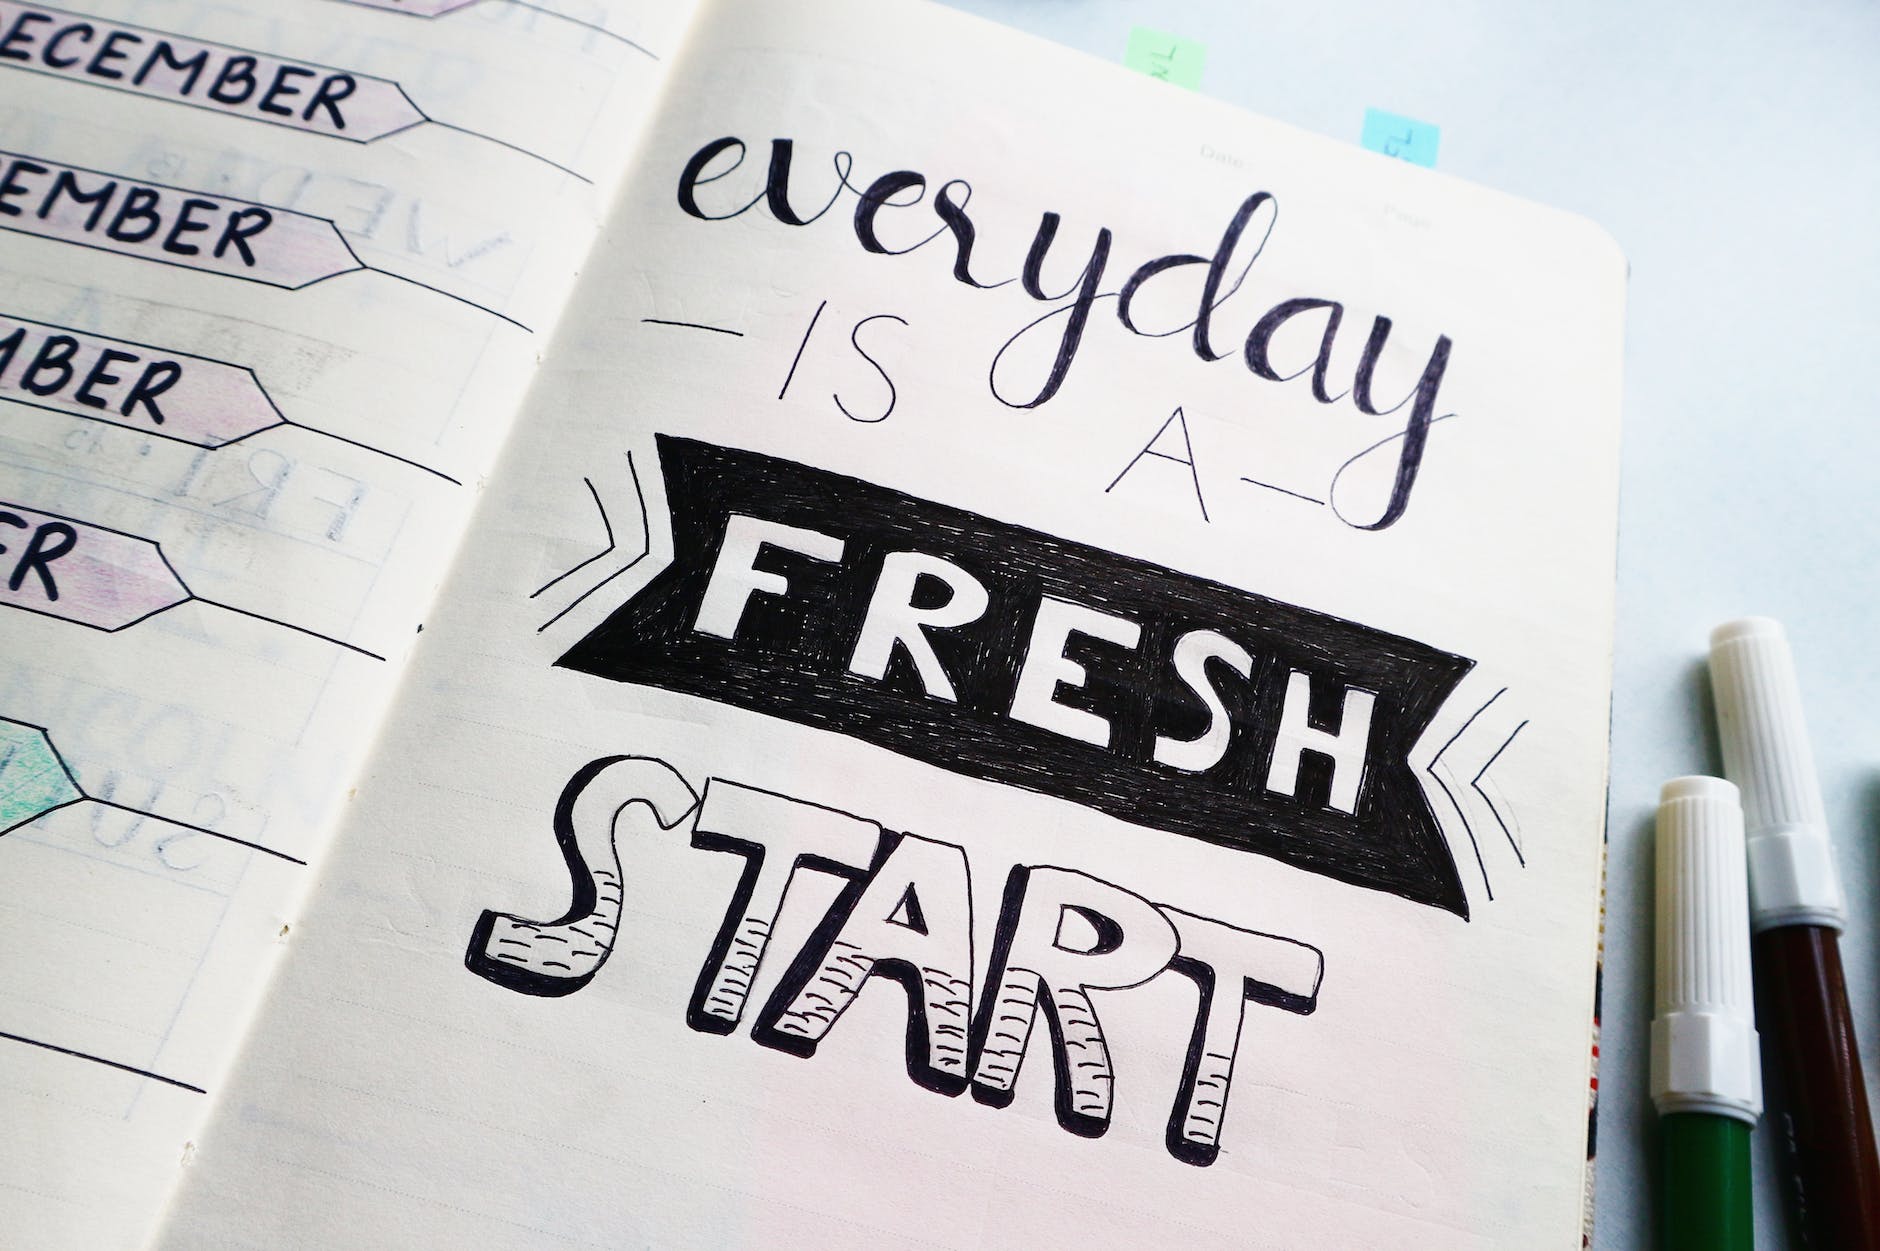 A Diary, and the page says - everyday is a fresh start.